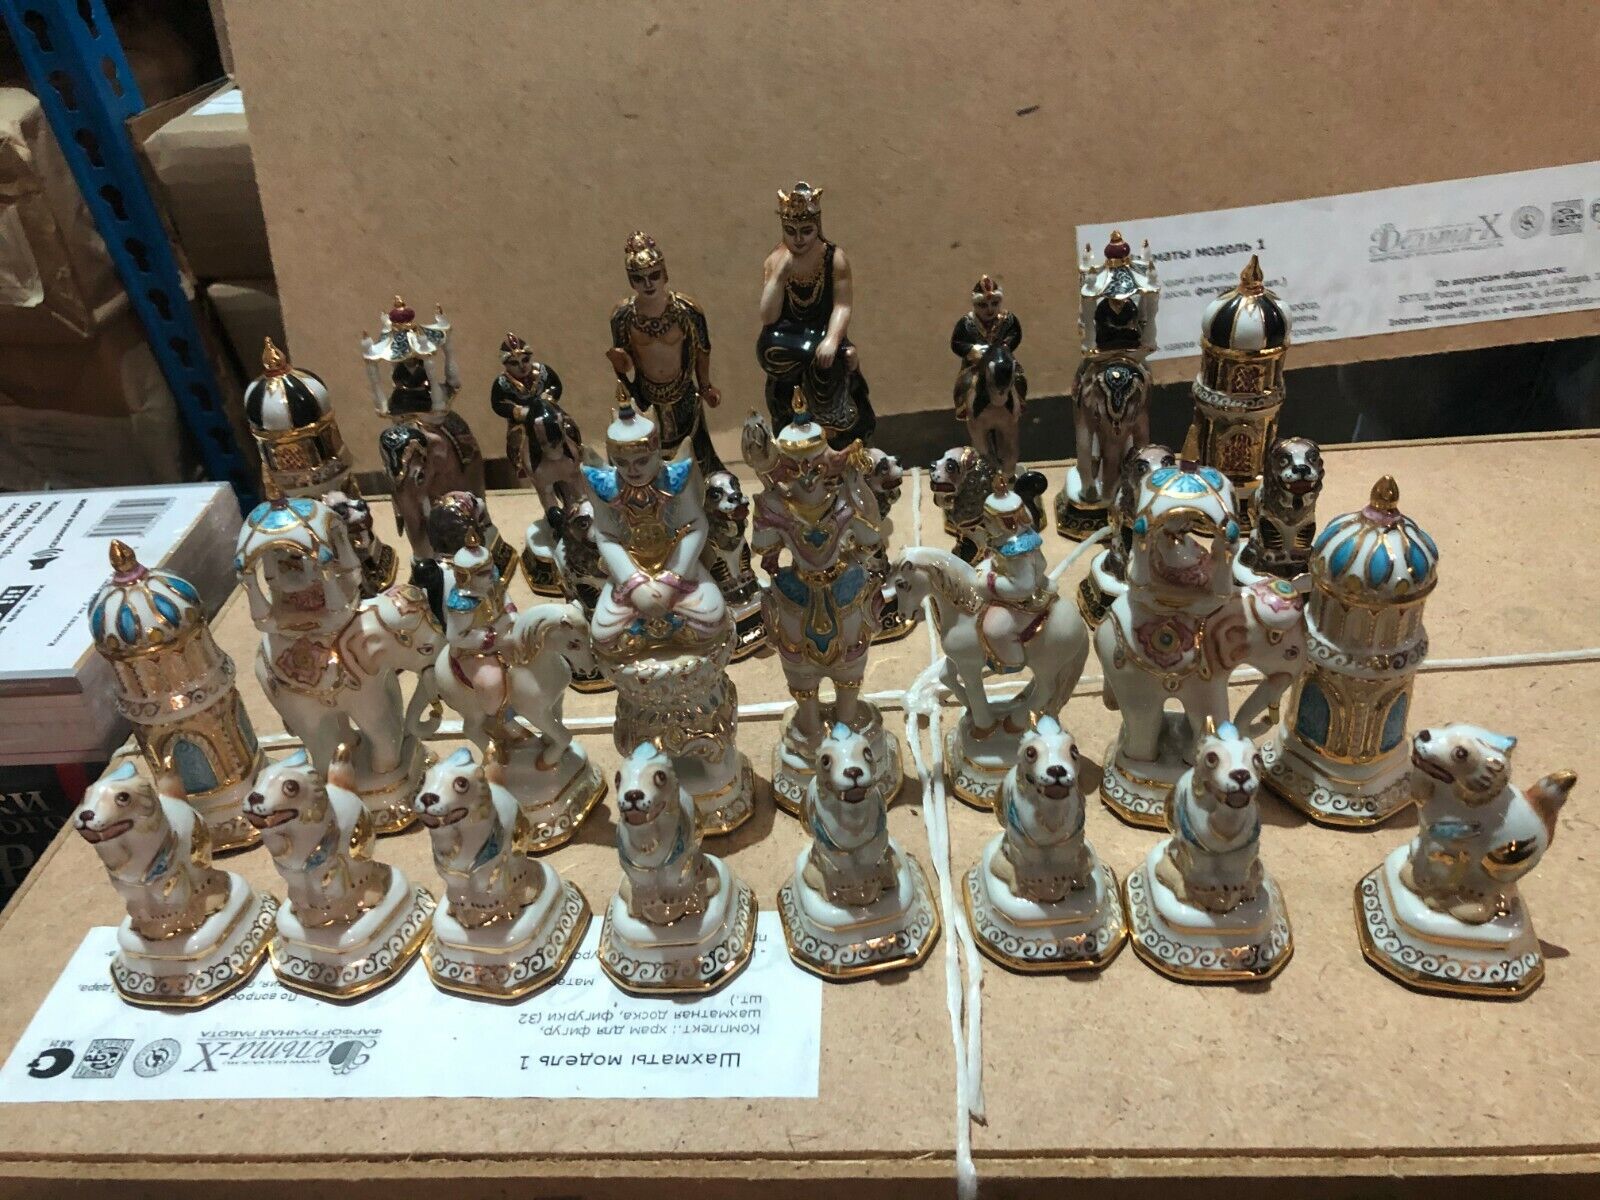 11596.Russian Porcelain Chess Pieces. Mohammedan India Classic. Kislovodsk